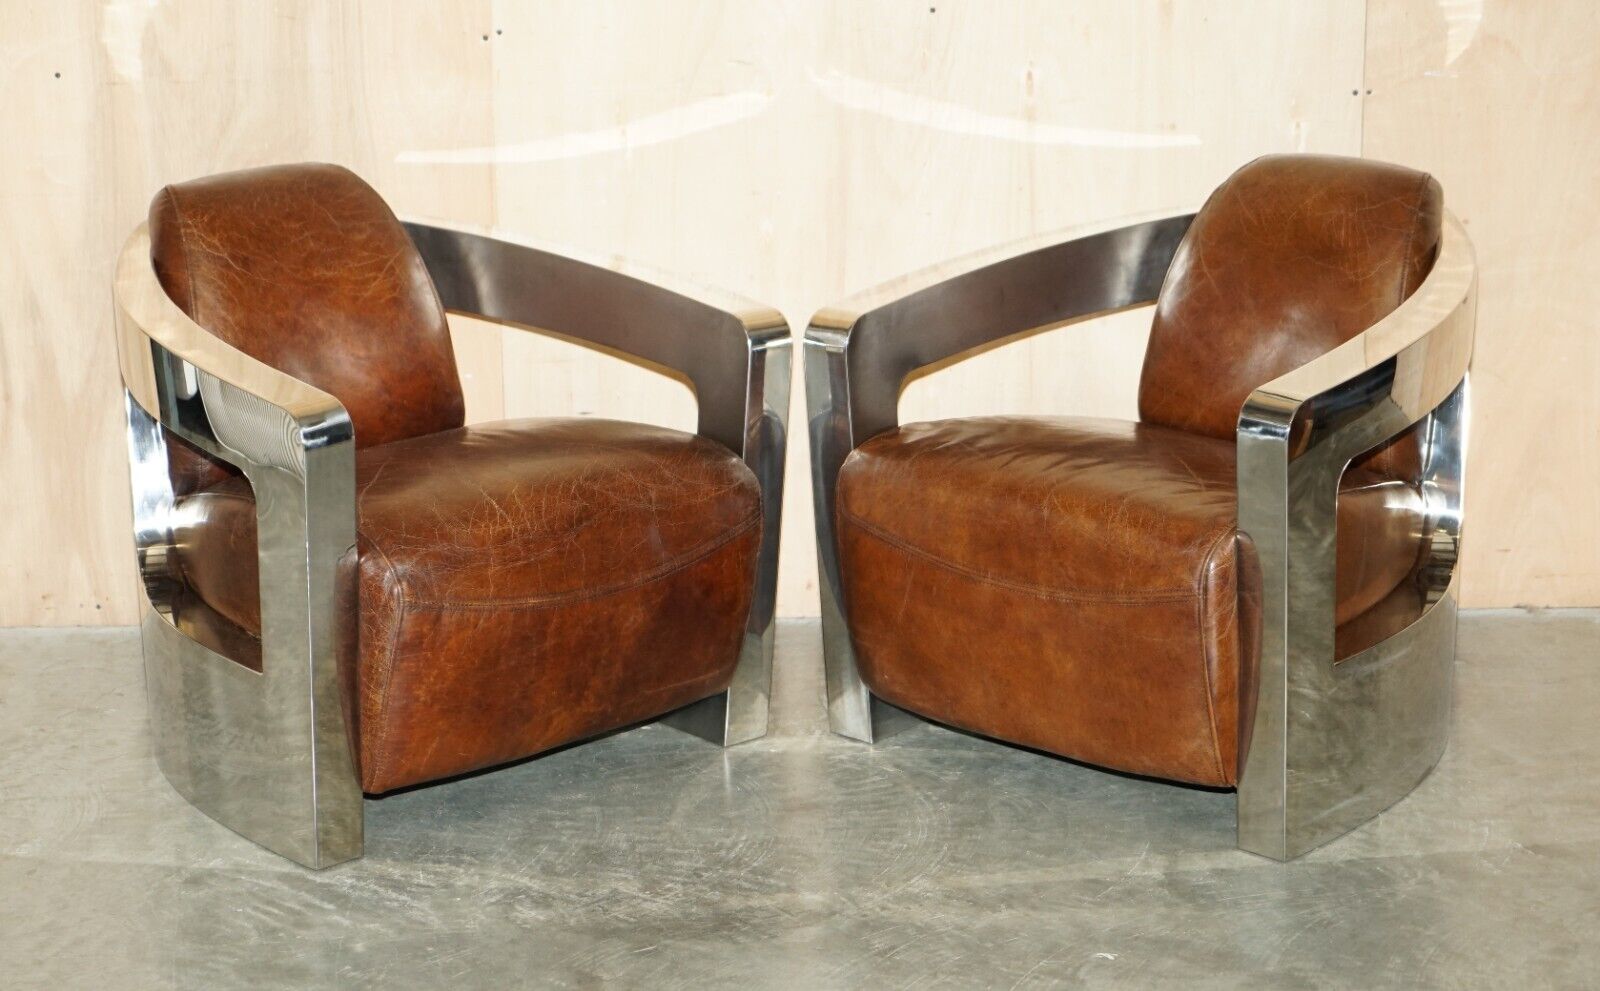 FINE PAIR OF VINTAGE ART DECO AVIATOR HERITAGE BROWN LEATHER & CHROME ARMCHAIRS